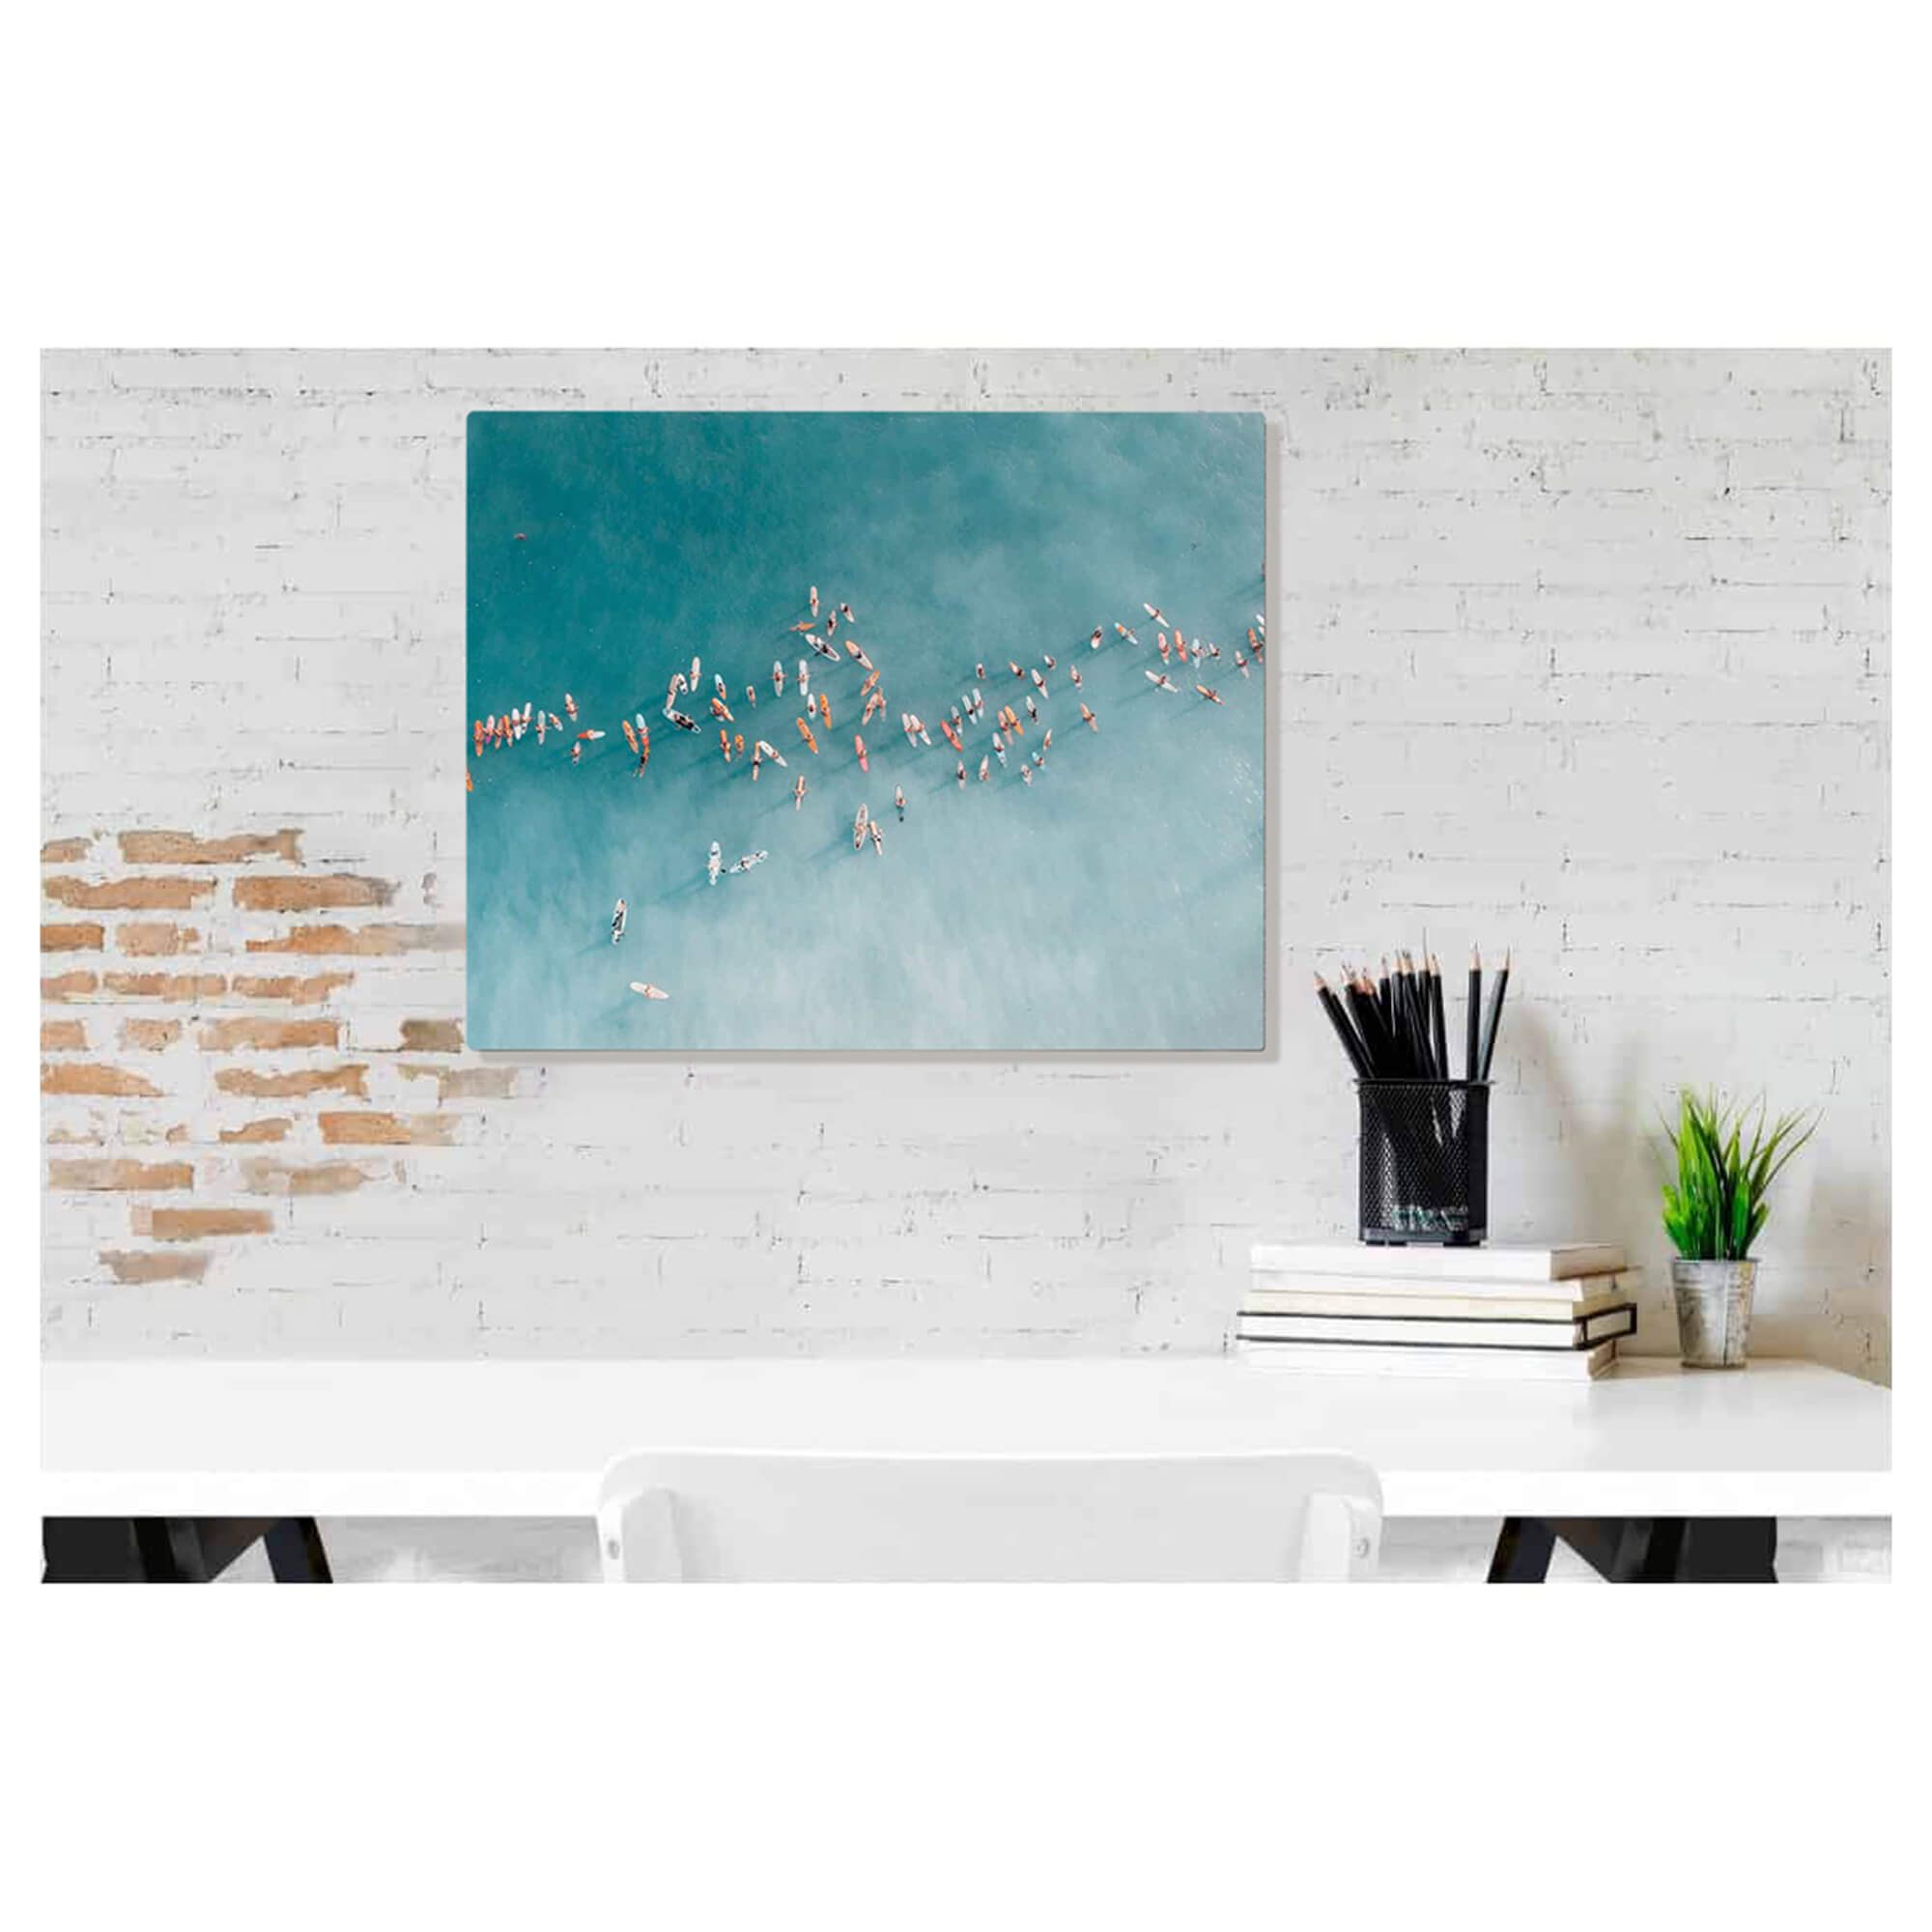 Metal art print of a large group of surfers paddling out to catch waves by Hawaii artist Bree Poort